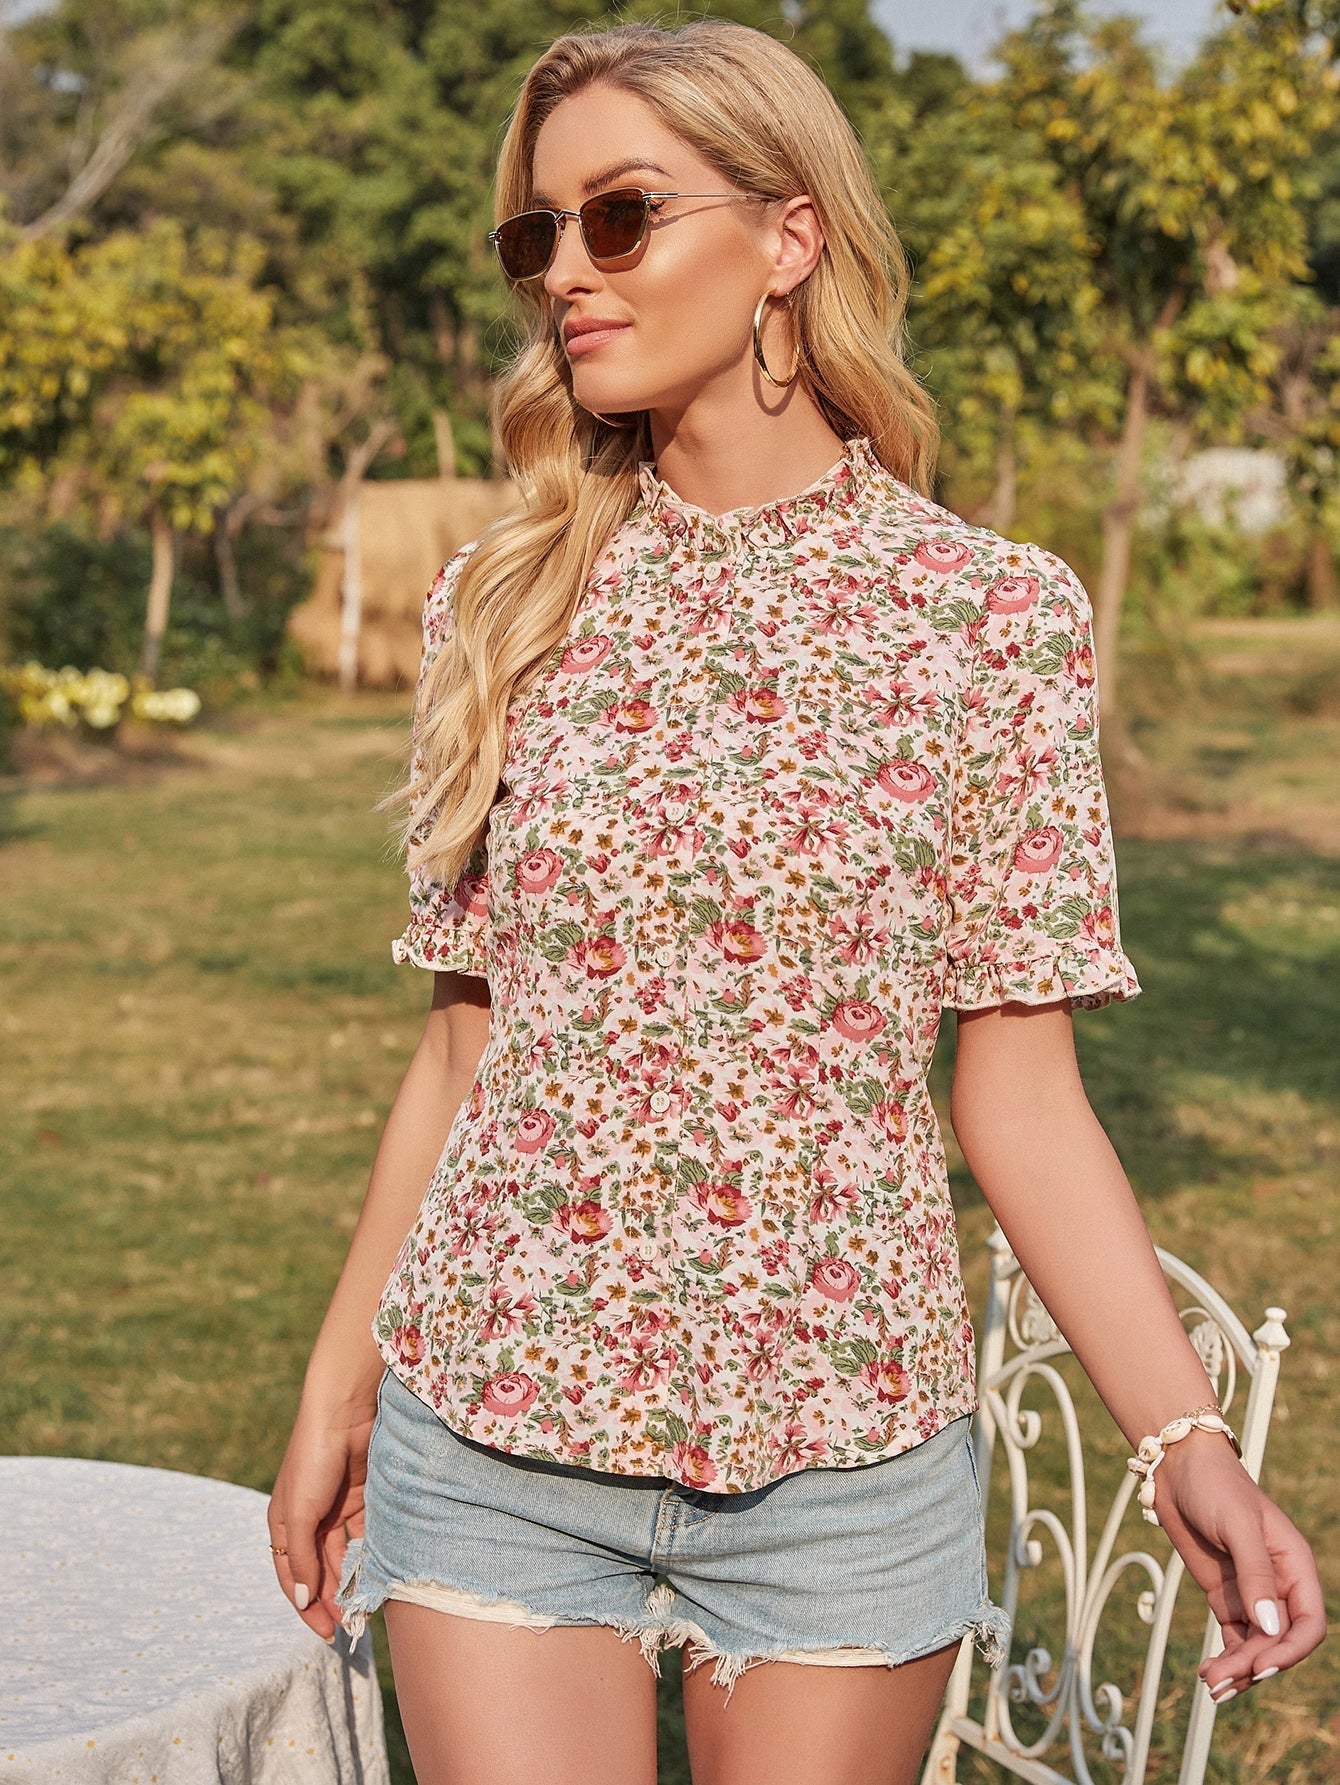 Pleated Floral Right Angle Shoulder Retro Top Sai Feel